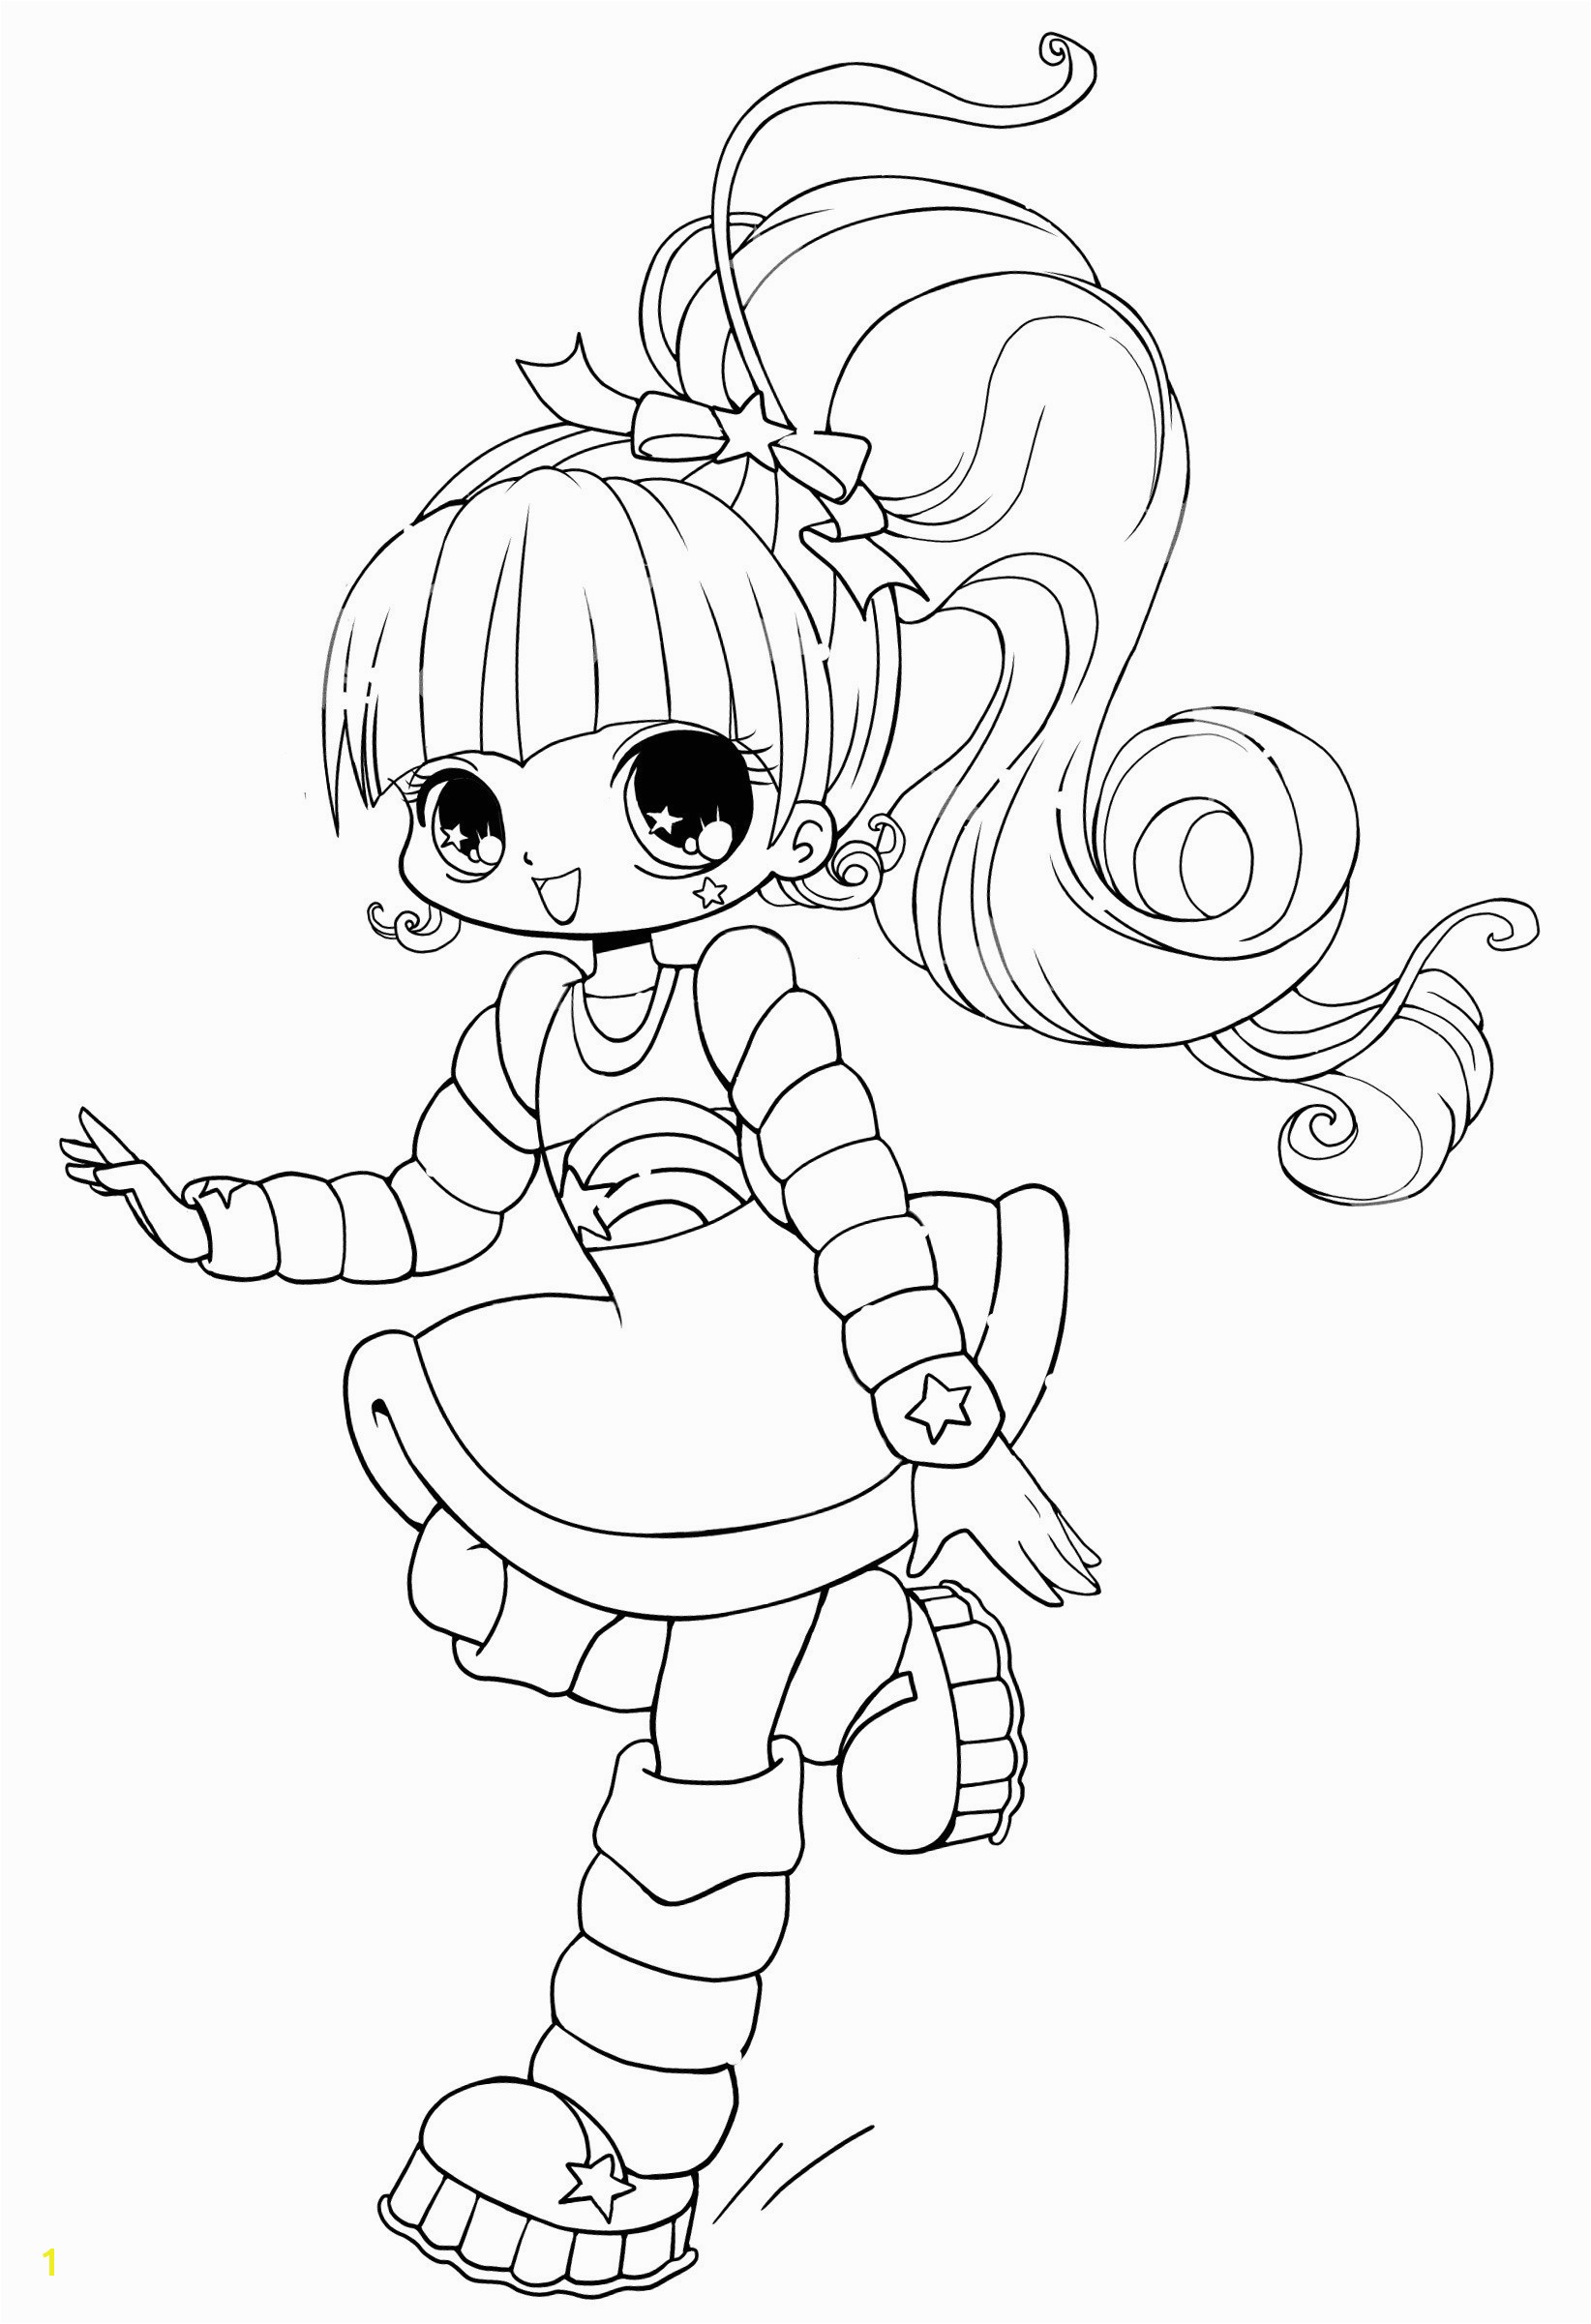 Cute Anime Coloring Pages 48 Fresh Collection Cute Anime Coloring Pages